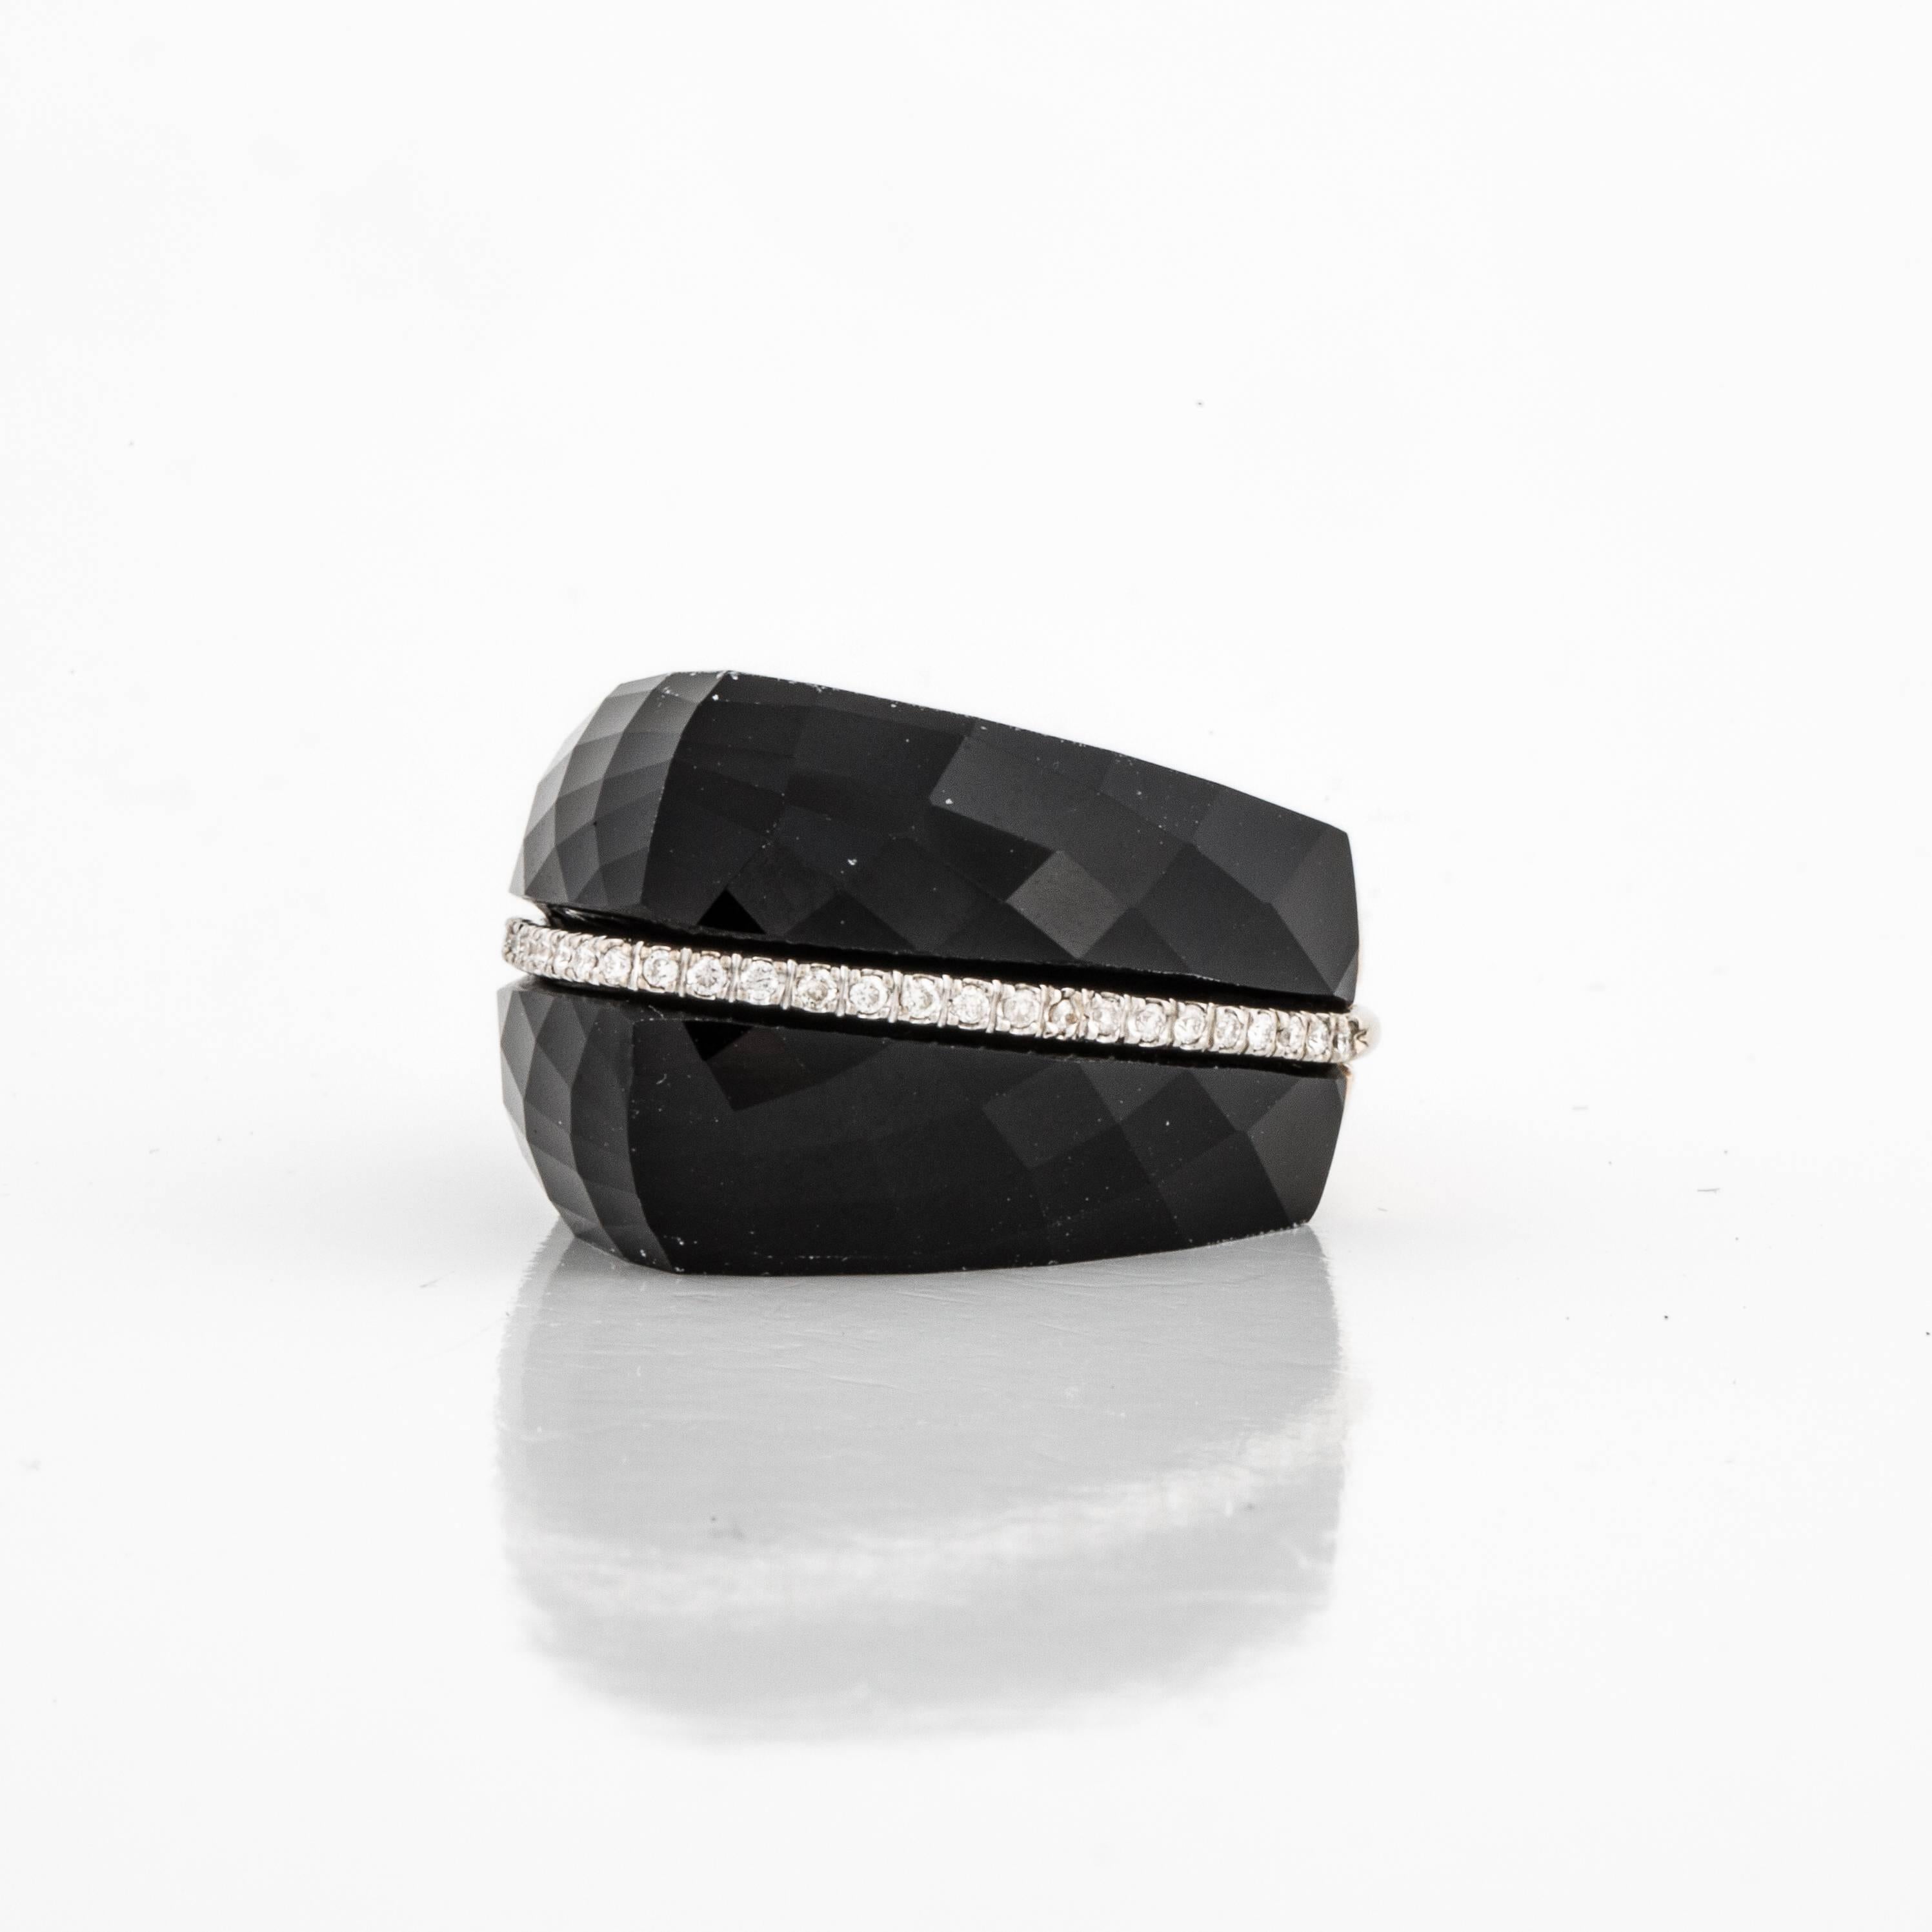 This modern ring by Mazza features faceted onyx with a row of diamonds across the top.  There is a total of 0.17 carats of diamonds.  The ring is constructed in yellow gold and marked on the inside 